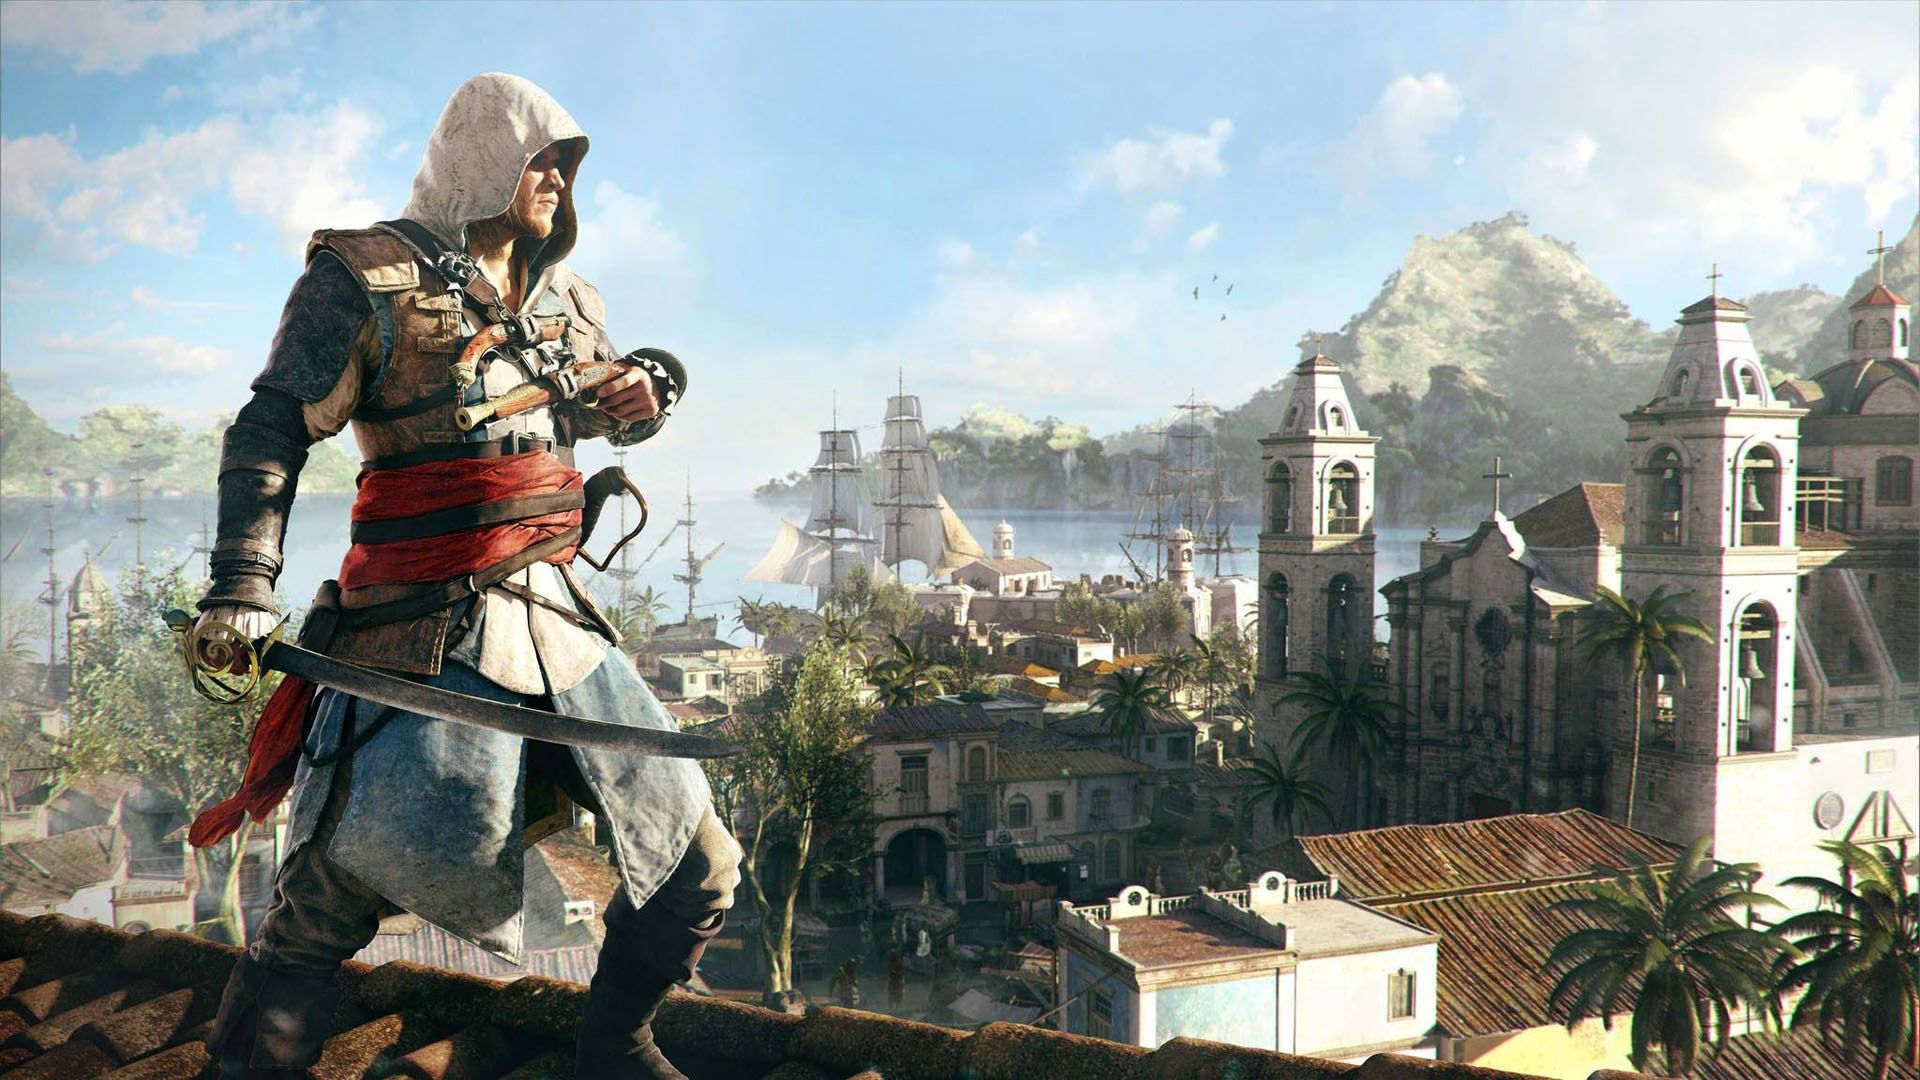 Assassin's Creed IV: Black Flag Wallpapers in 1920x1080